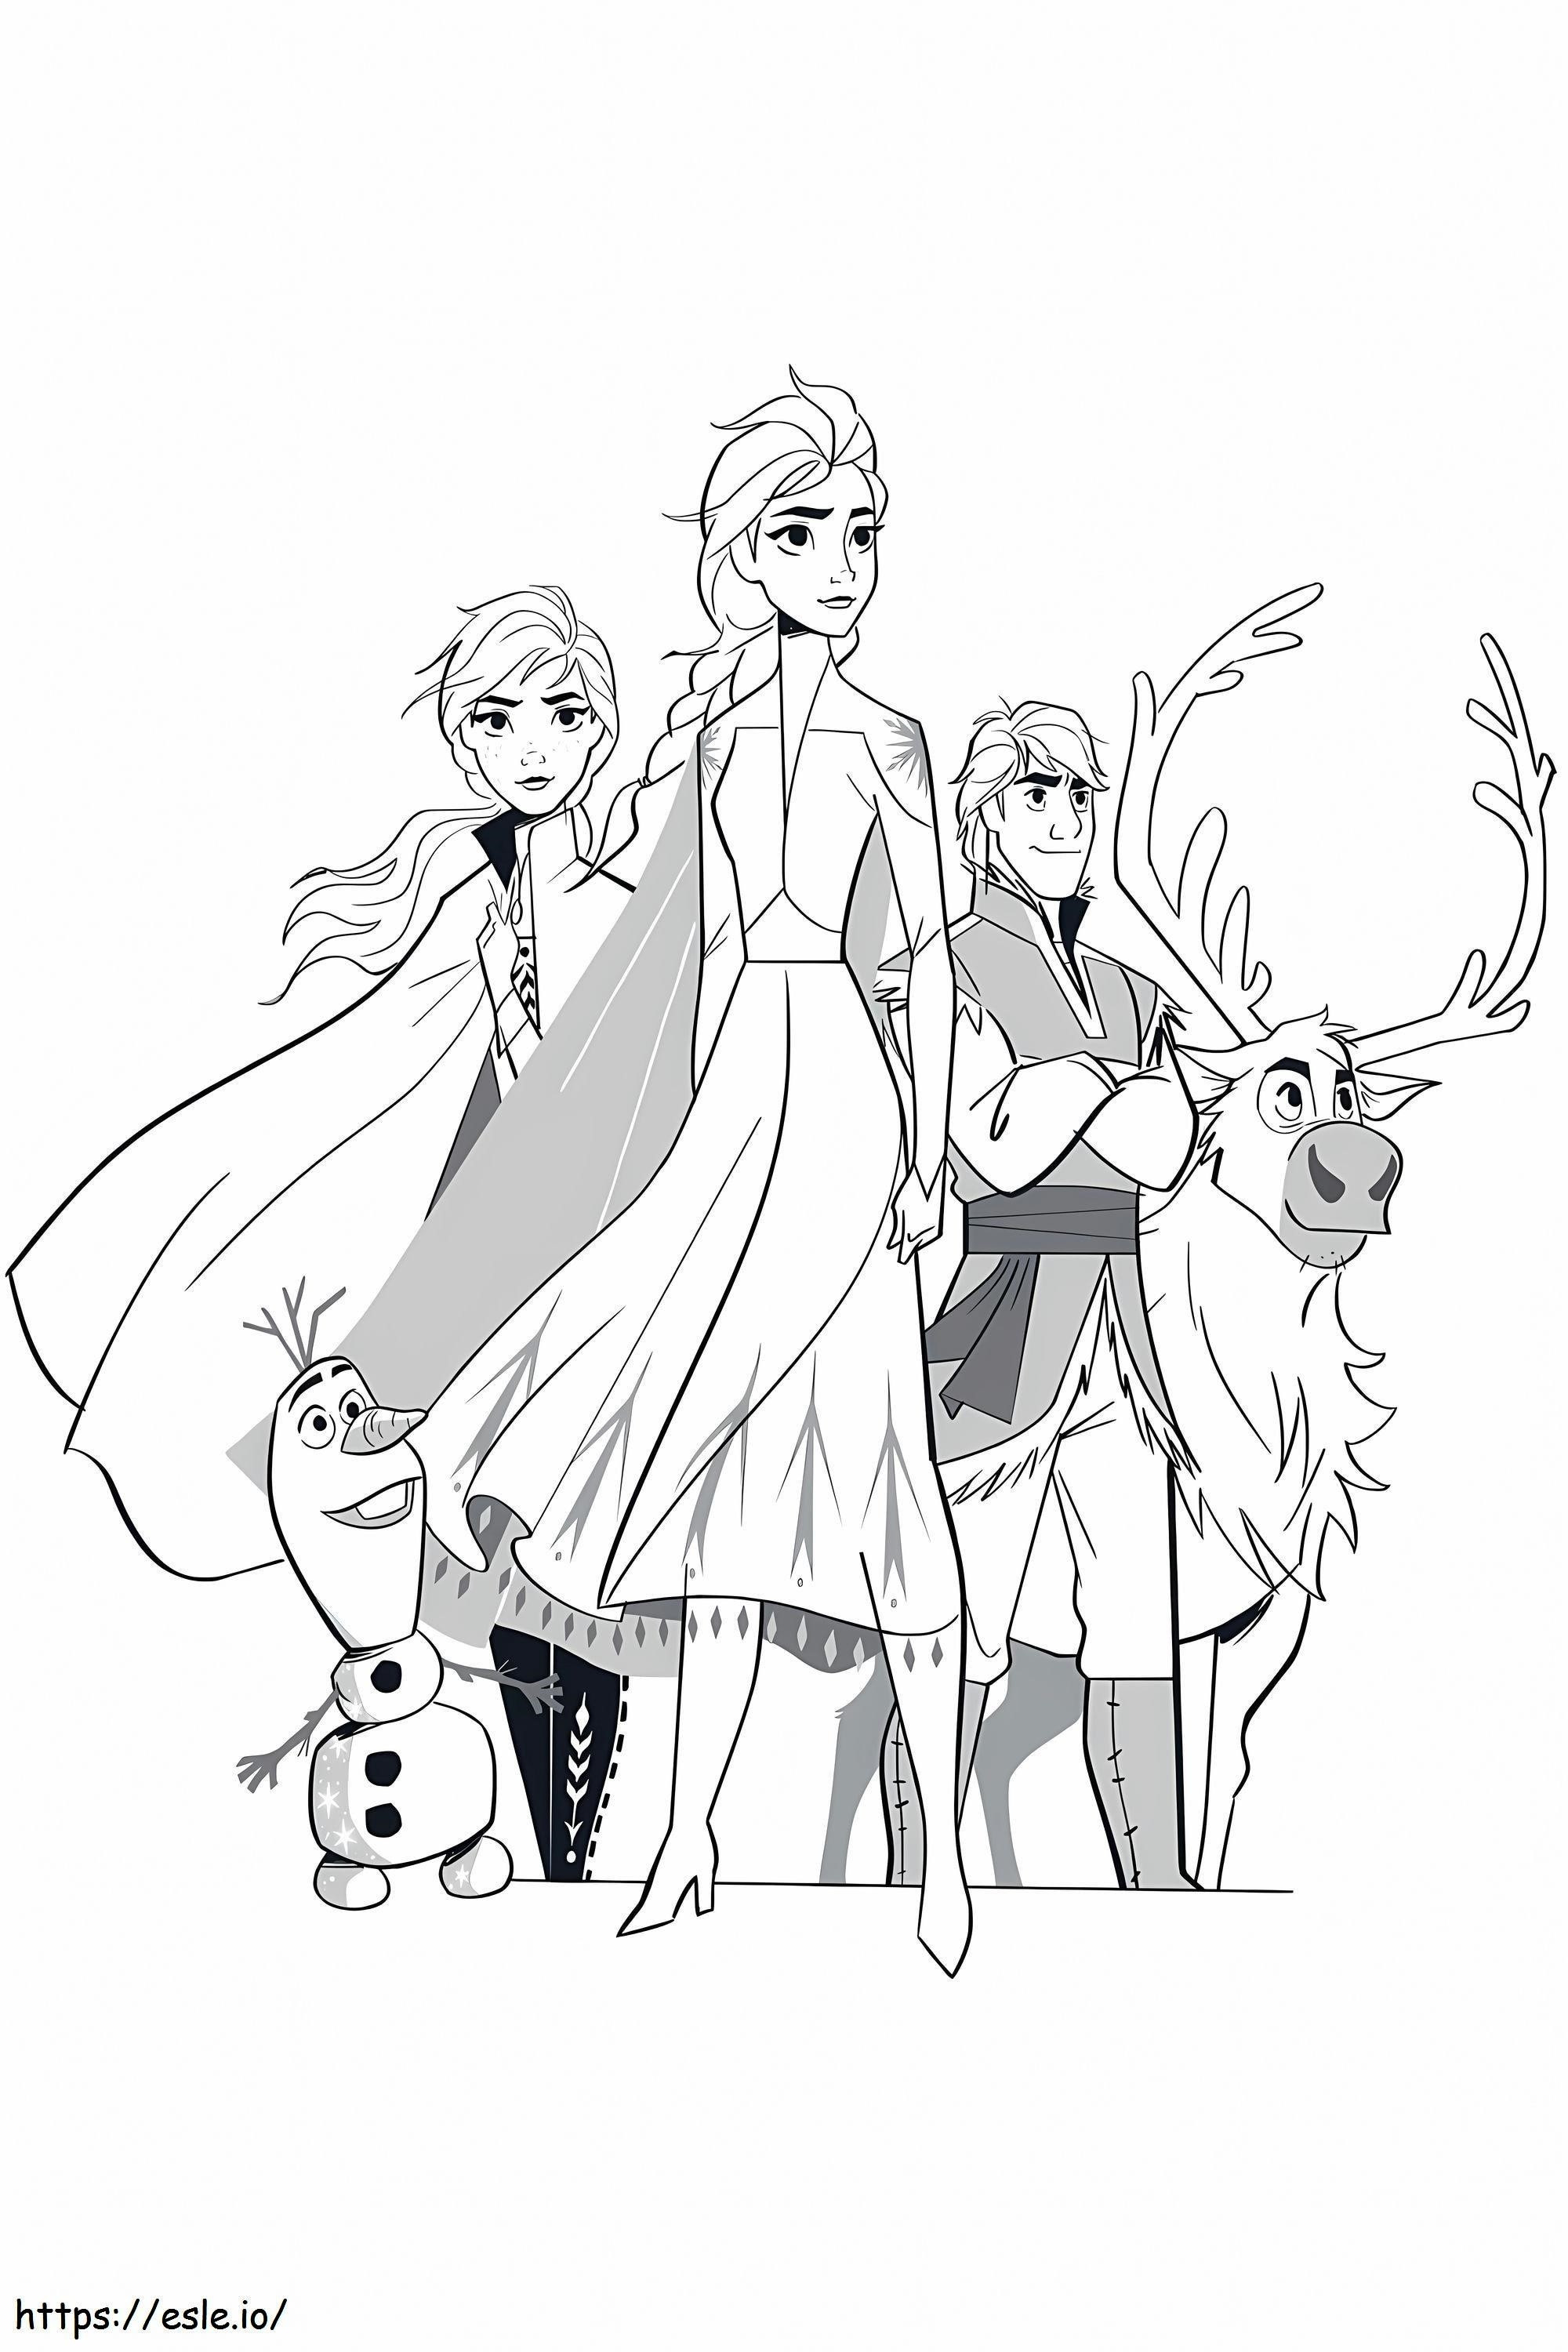 The Snow Queen 2 Characters coloring page